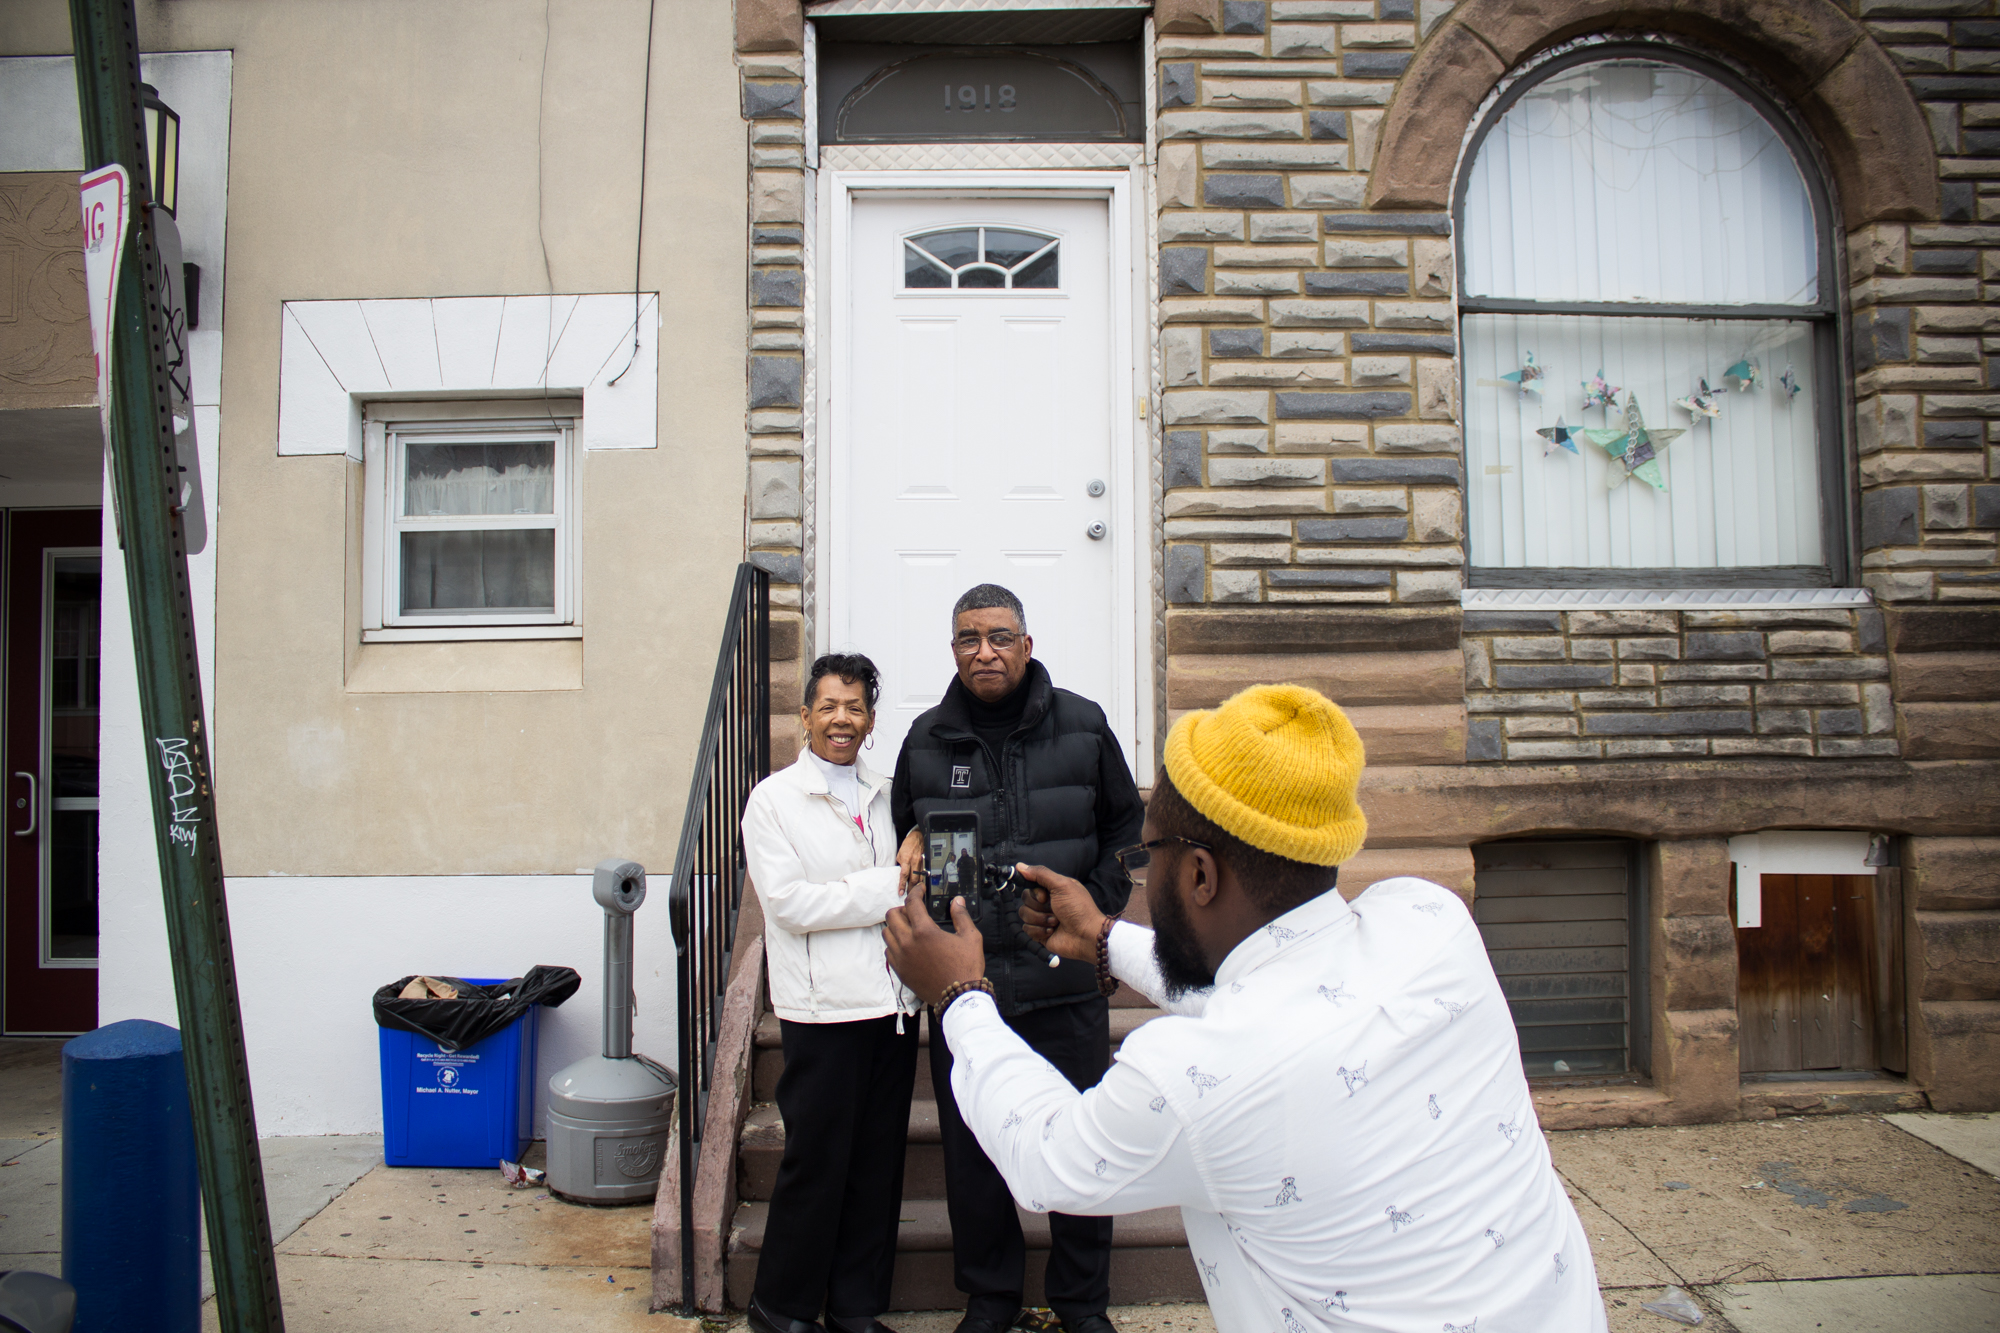  Visual Documentarian Donnell Powell takes a photo of Alice and Beresford Gabbadon during The Redline Project workshop at The Dixon House in Point Breeze January 16, 2016.  "I grew up in Point Breeze my whole life," said Alice. "When I was a young gi